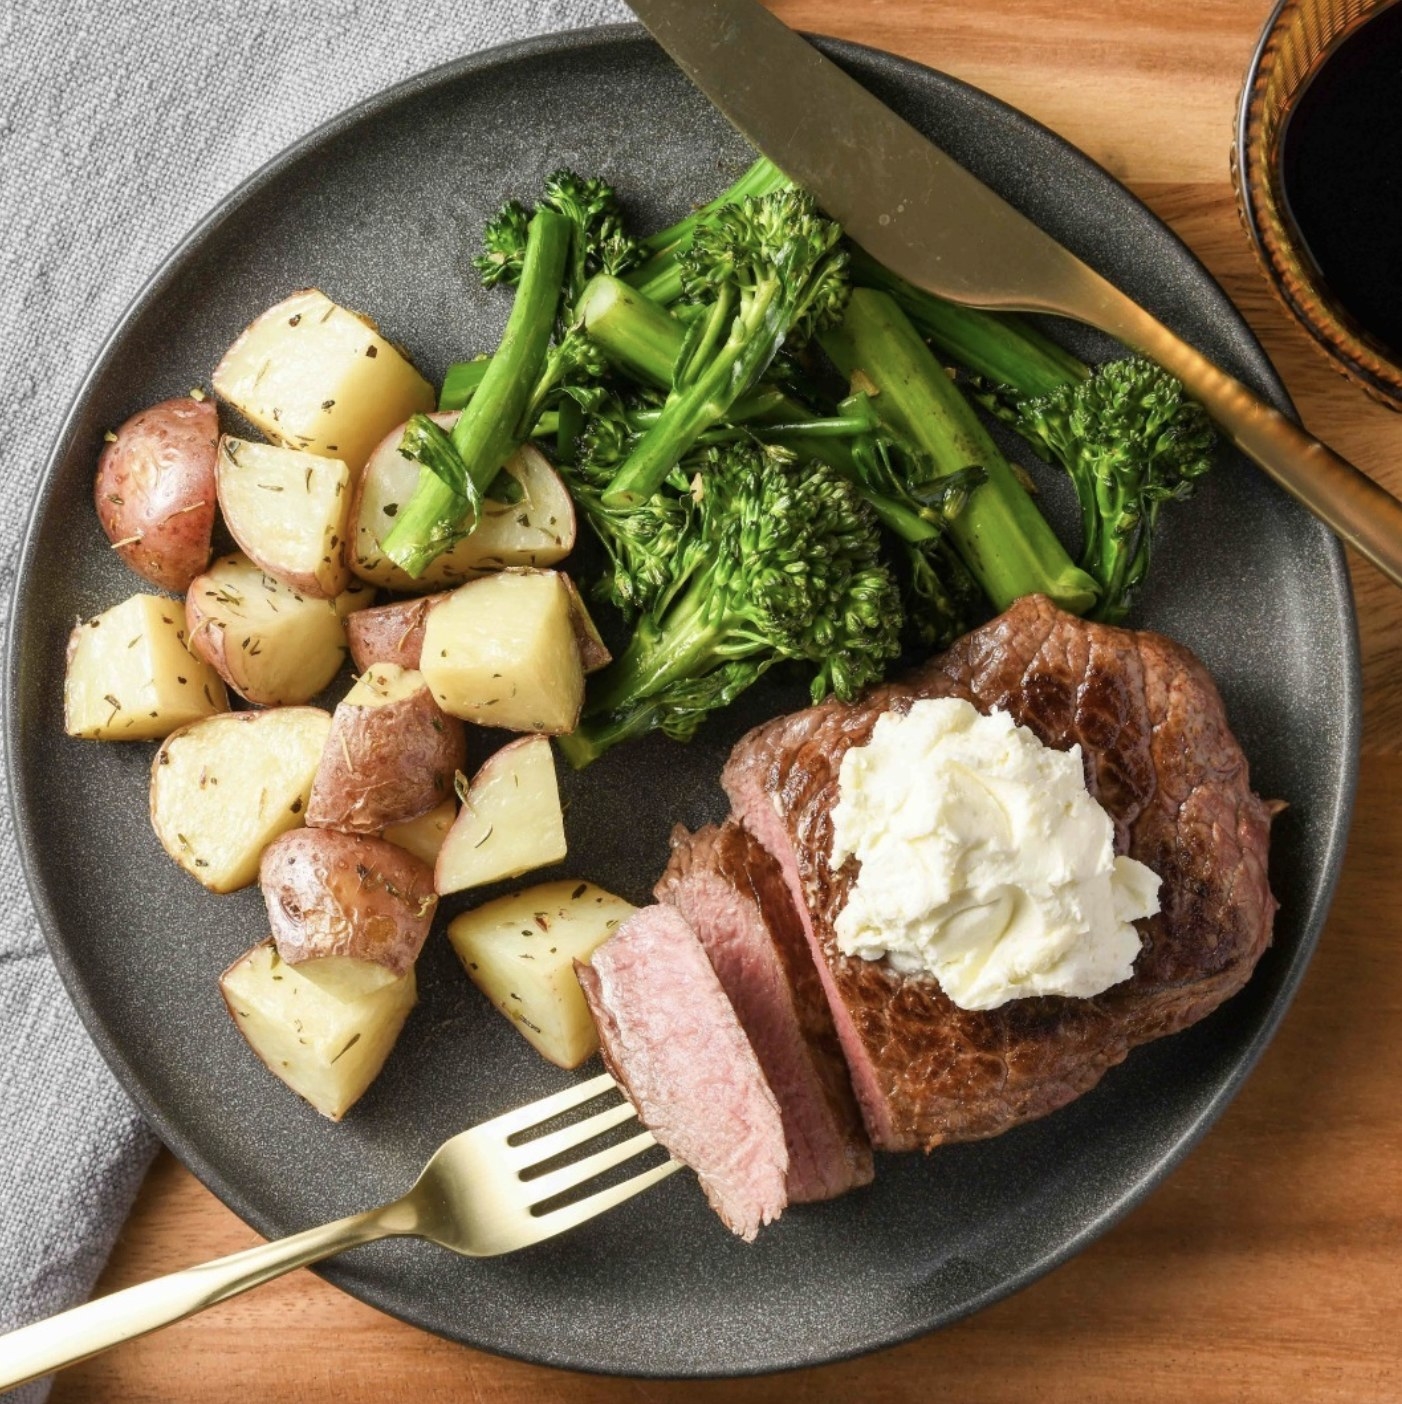 A dinner plate with medium steak, rosemary potatoes and tender steamed broccoli